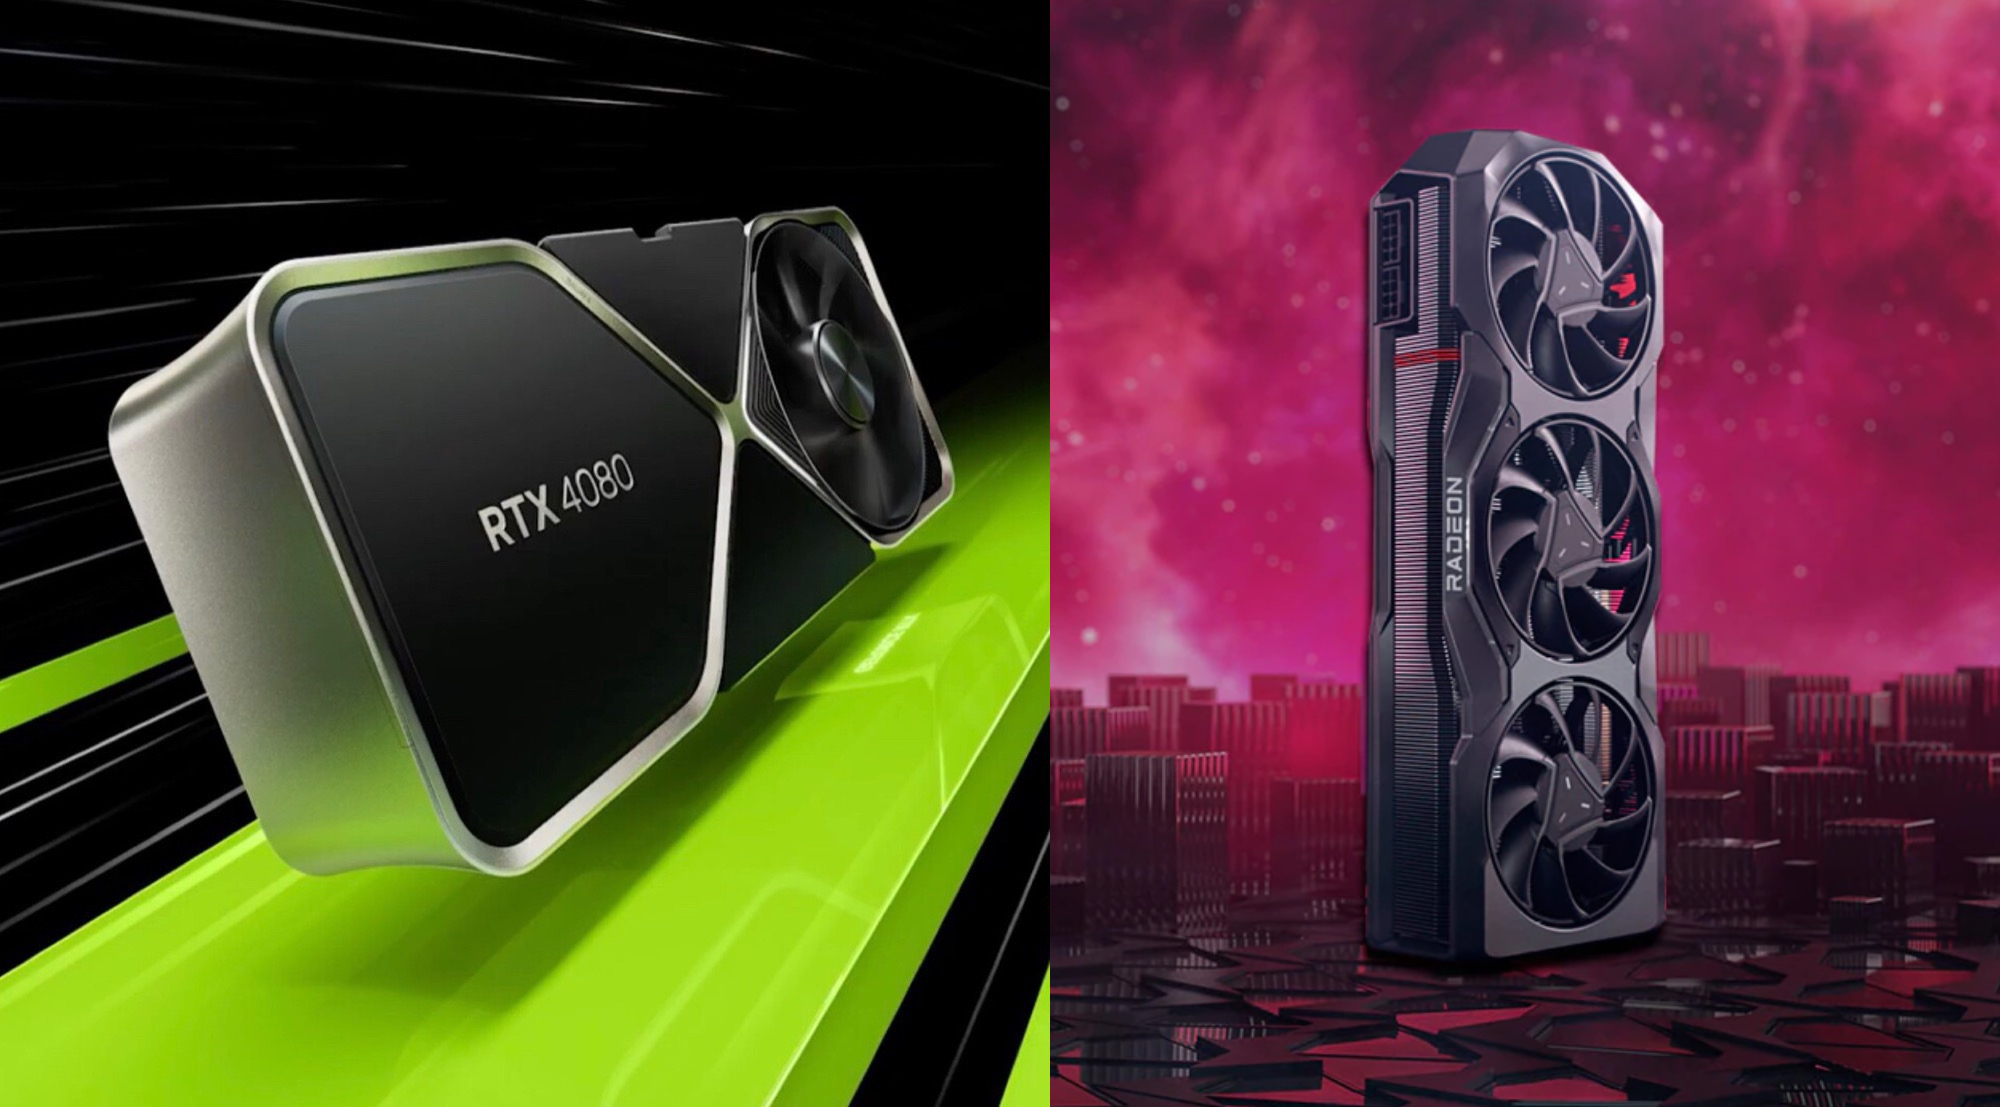 Amd Finally Compares Radeon Rx Xt And Radeon Rx Xtx With Nvidia Geforce Rtx And